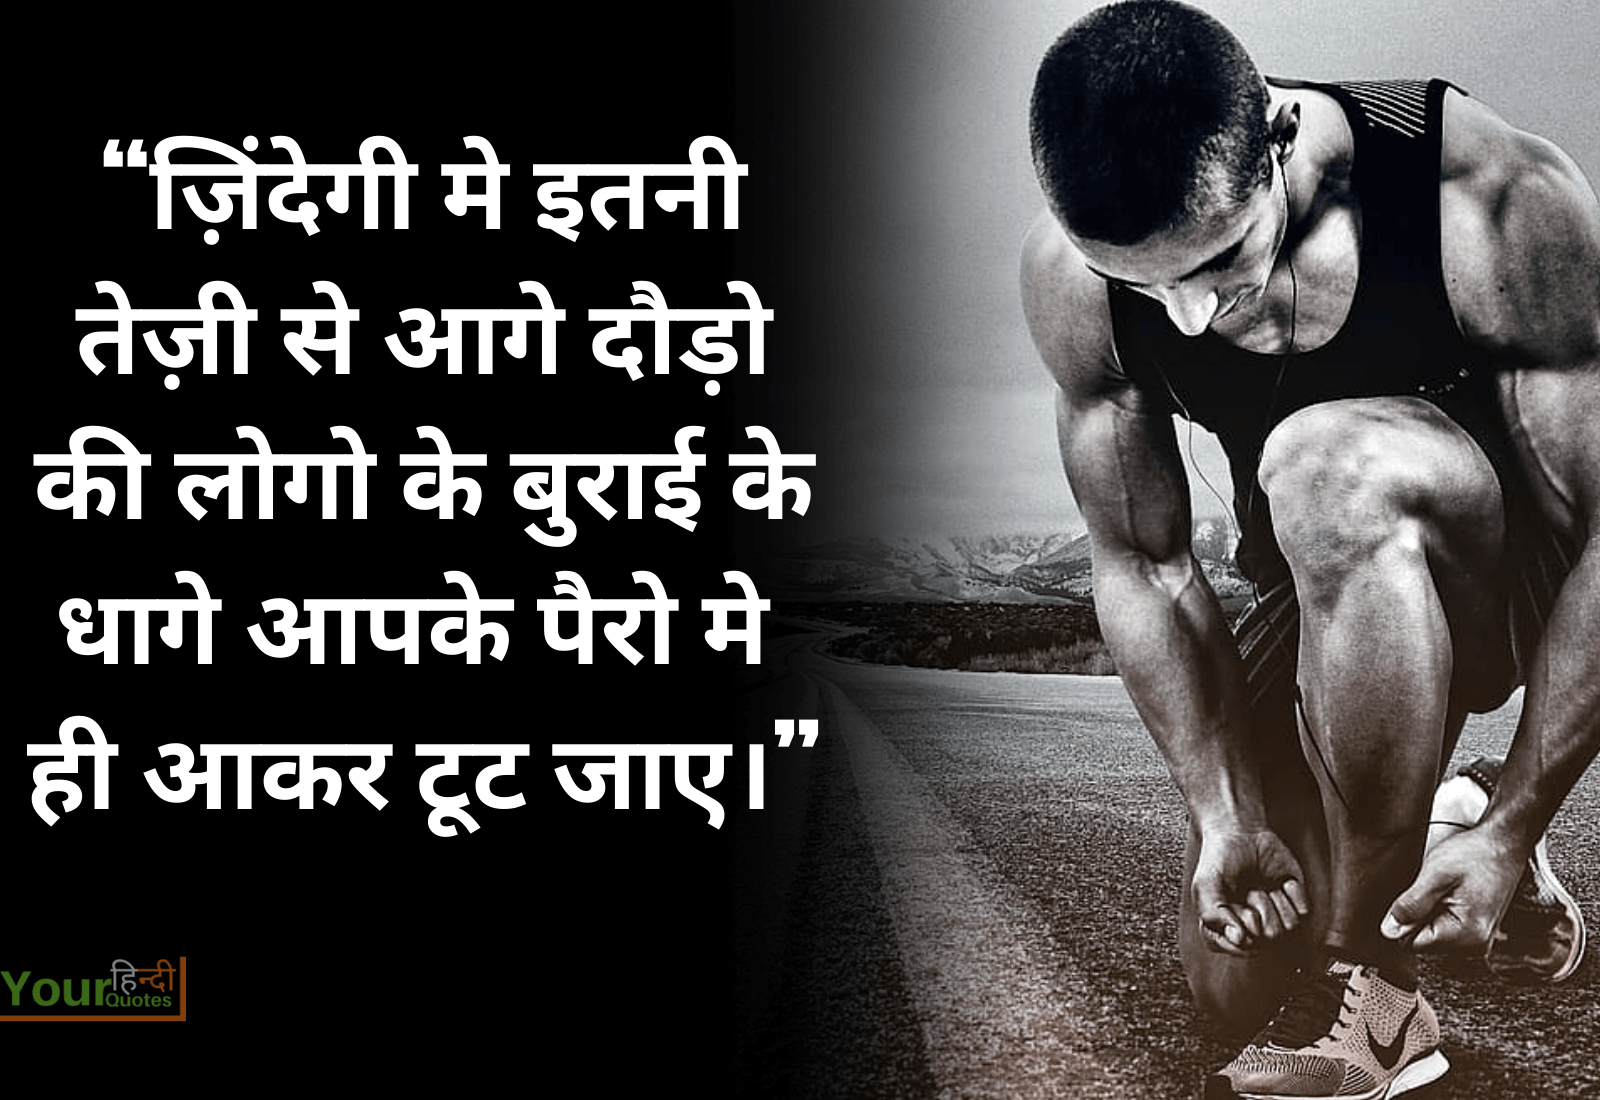 Best Thought Image in hindi